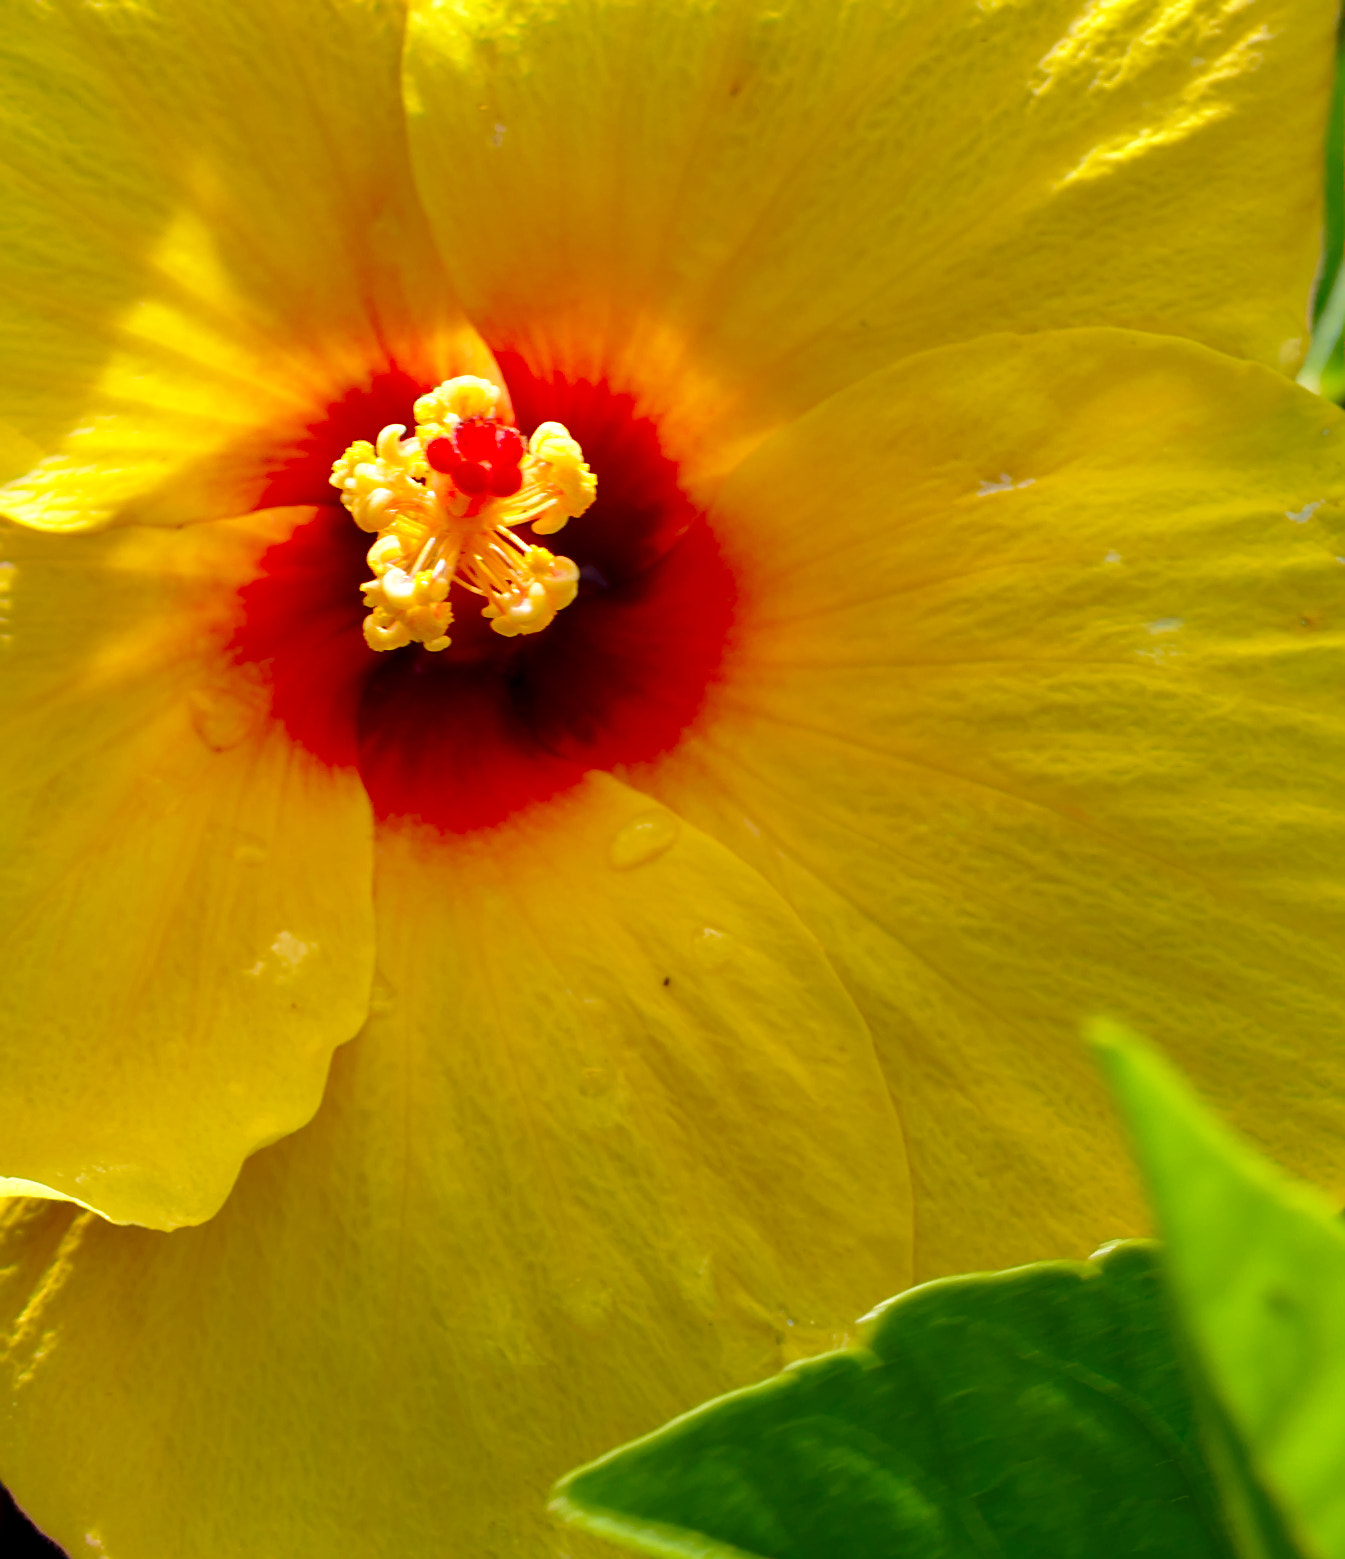 ZEISS Otus 85mm F1.4 sample photo. Close-up of a yellow hibiscus photography